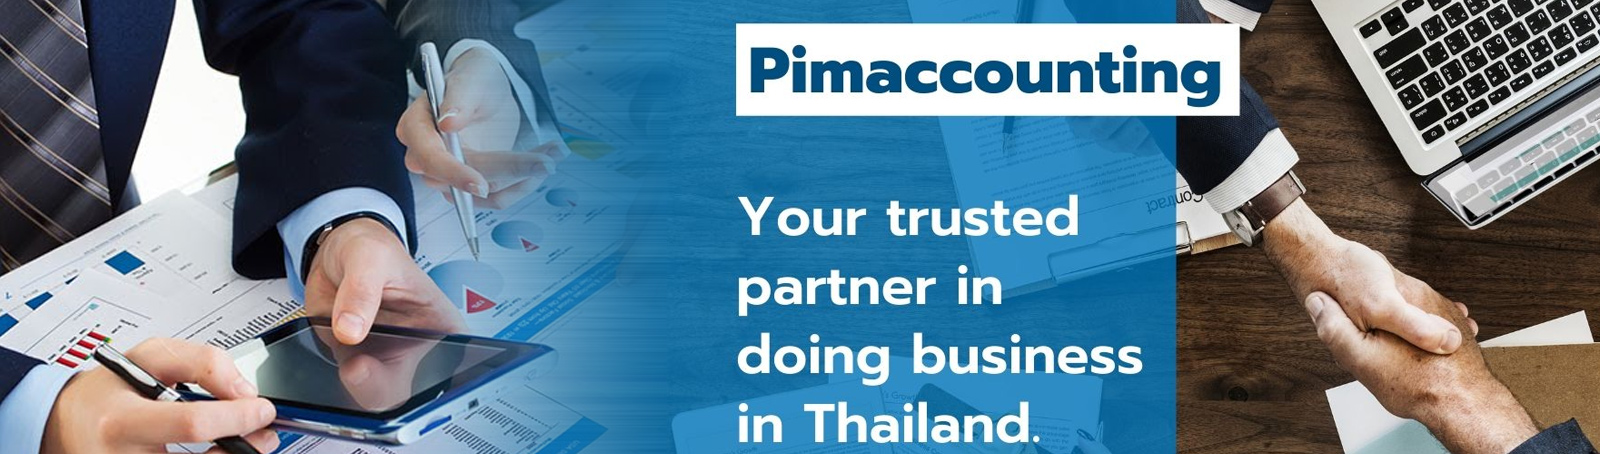 Pimaccounting Your trusted partner in doing business in Thailand.